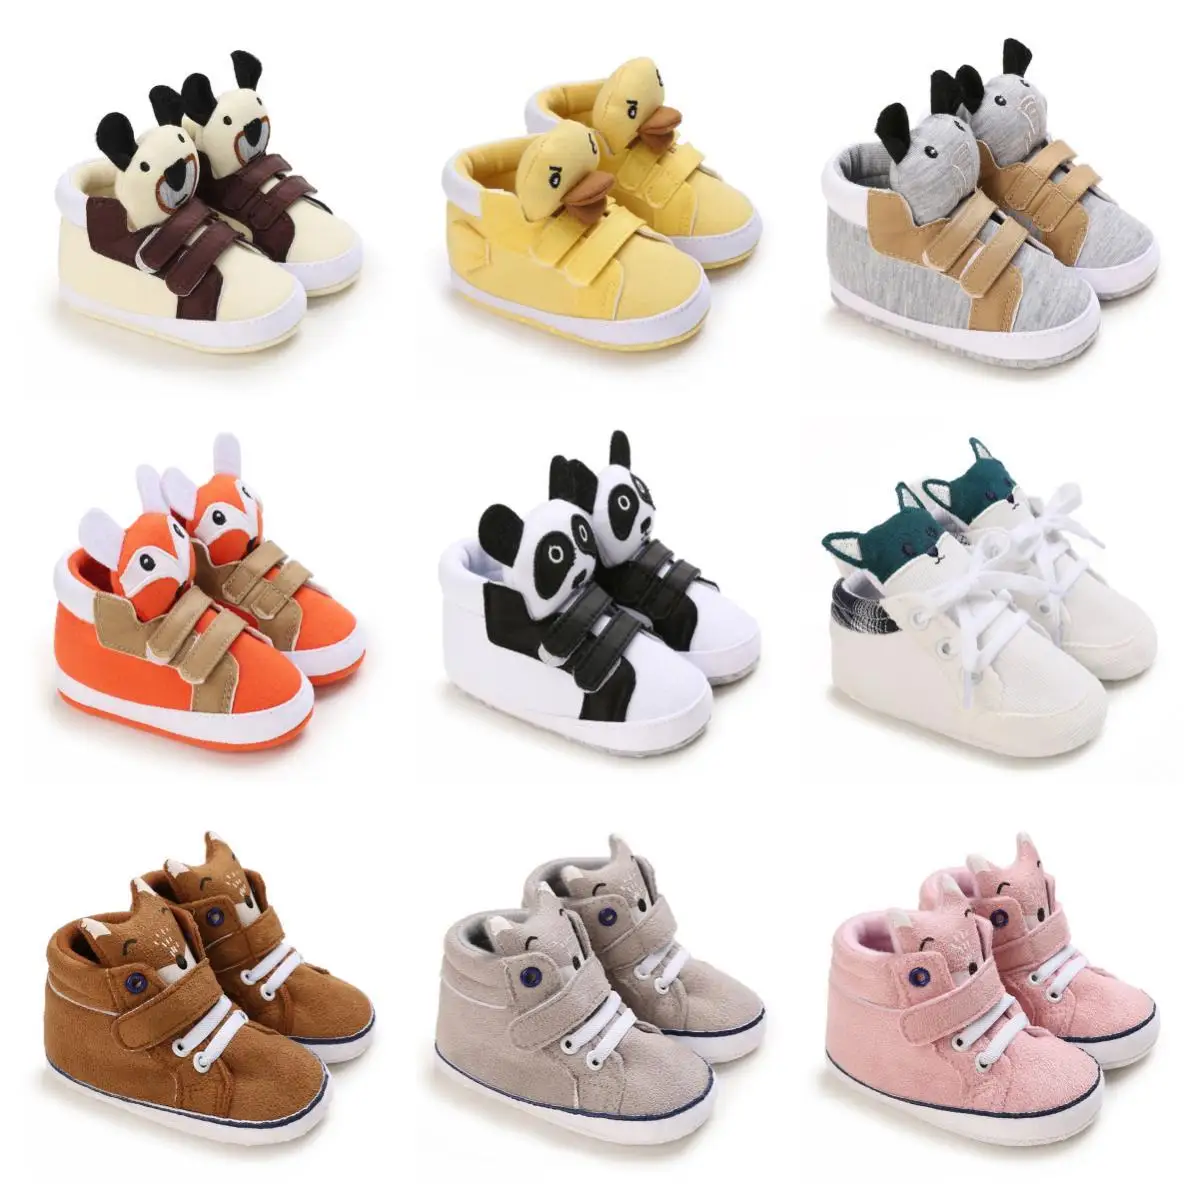 Classic Baby Shoe Boy Girl Baby Cute Animal Face Casual Flat Sneaker First Baby Ankle Boot Cotton Non-slip Warm Walking Shoes baby shoes for girl cotton cartoon animal baby boy shoes 2022 spring autumn new casual semi rubber soft soled non slip shoe